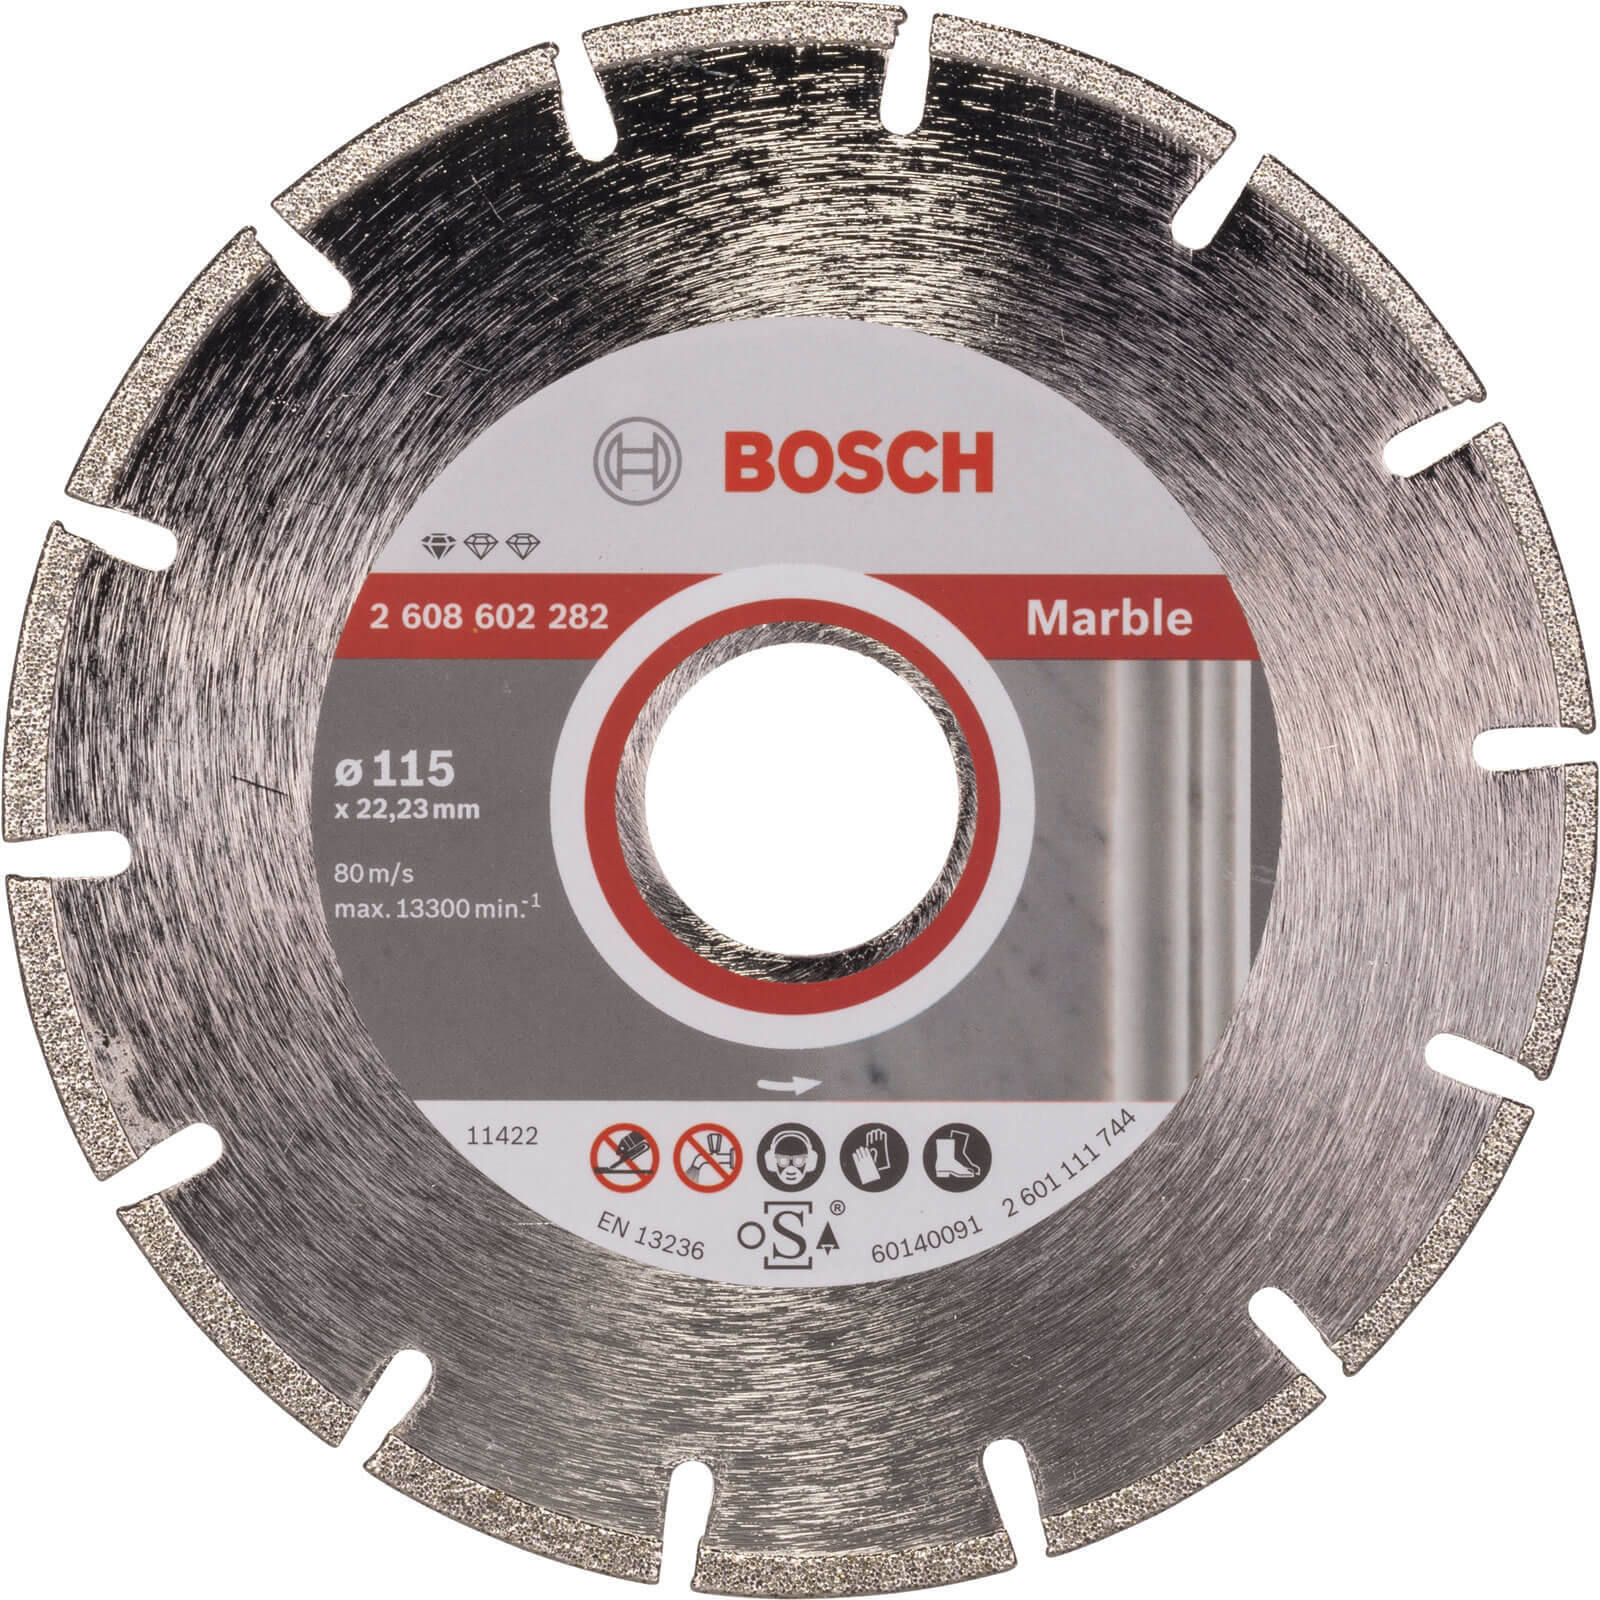 Photo of Bosch Diamond Disc For Marble 115mm